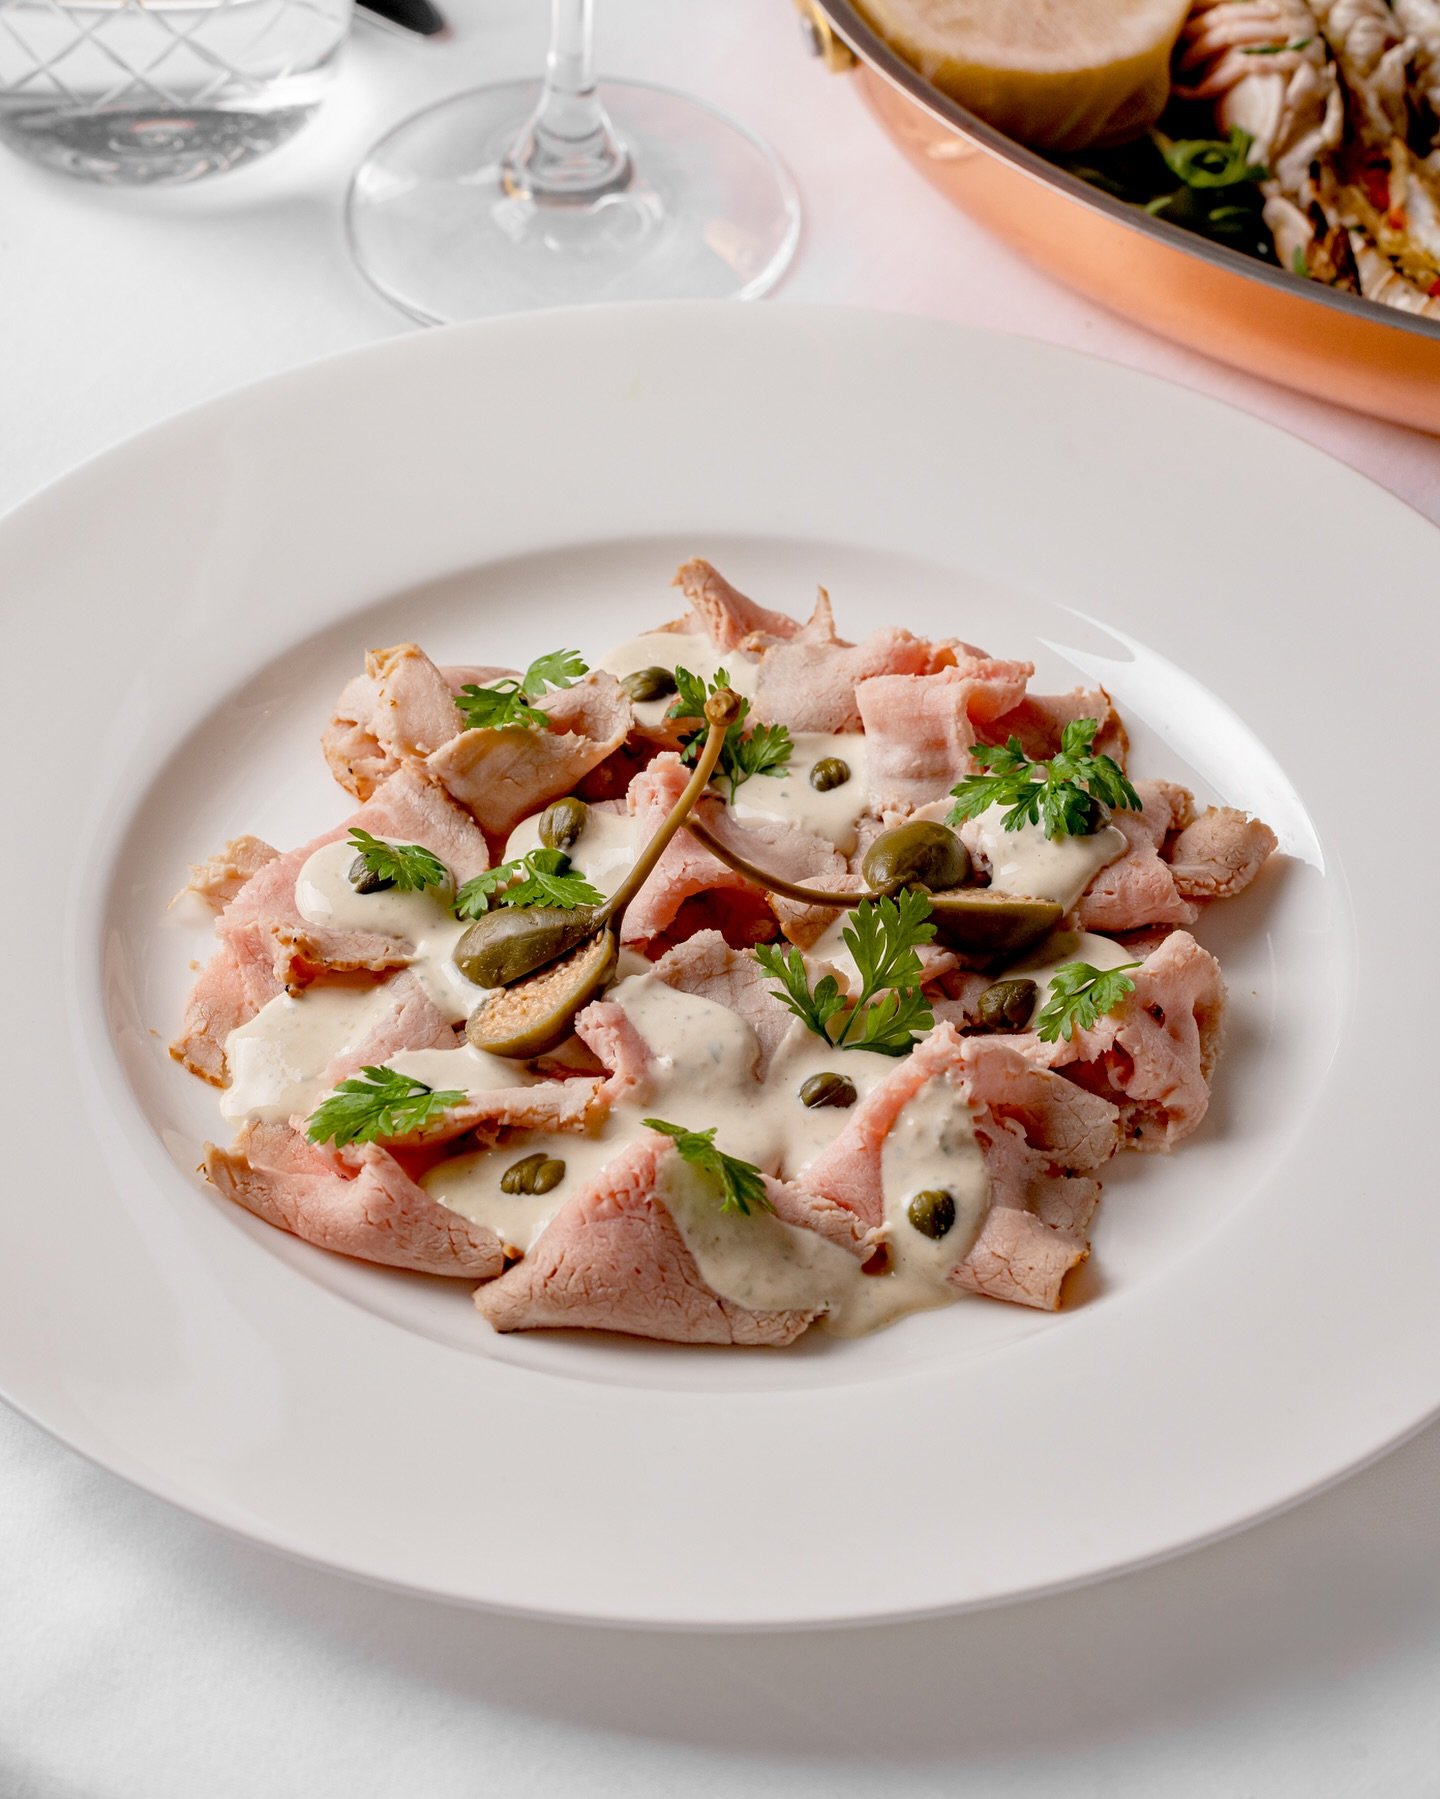 Reimagined by our talented chefs, indulge in the flavours of la dolce vita with our Vitello Tonnato. Chilled thinly sliced veal paired with tuna in a seasoned caper sauce await you.

Savour our menu via the link in thew bio.